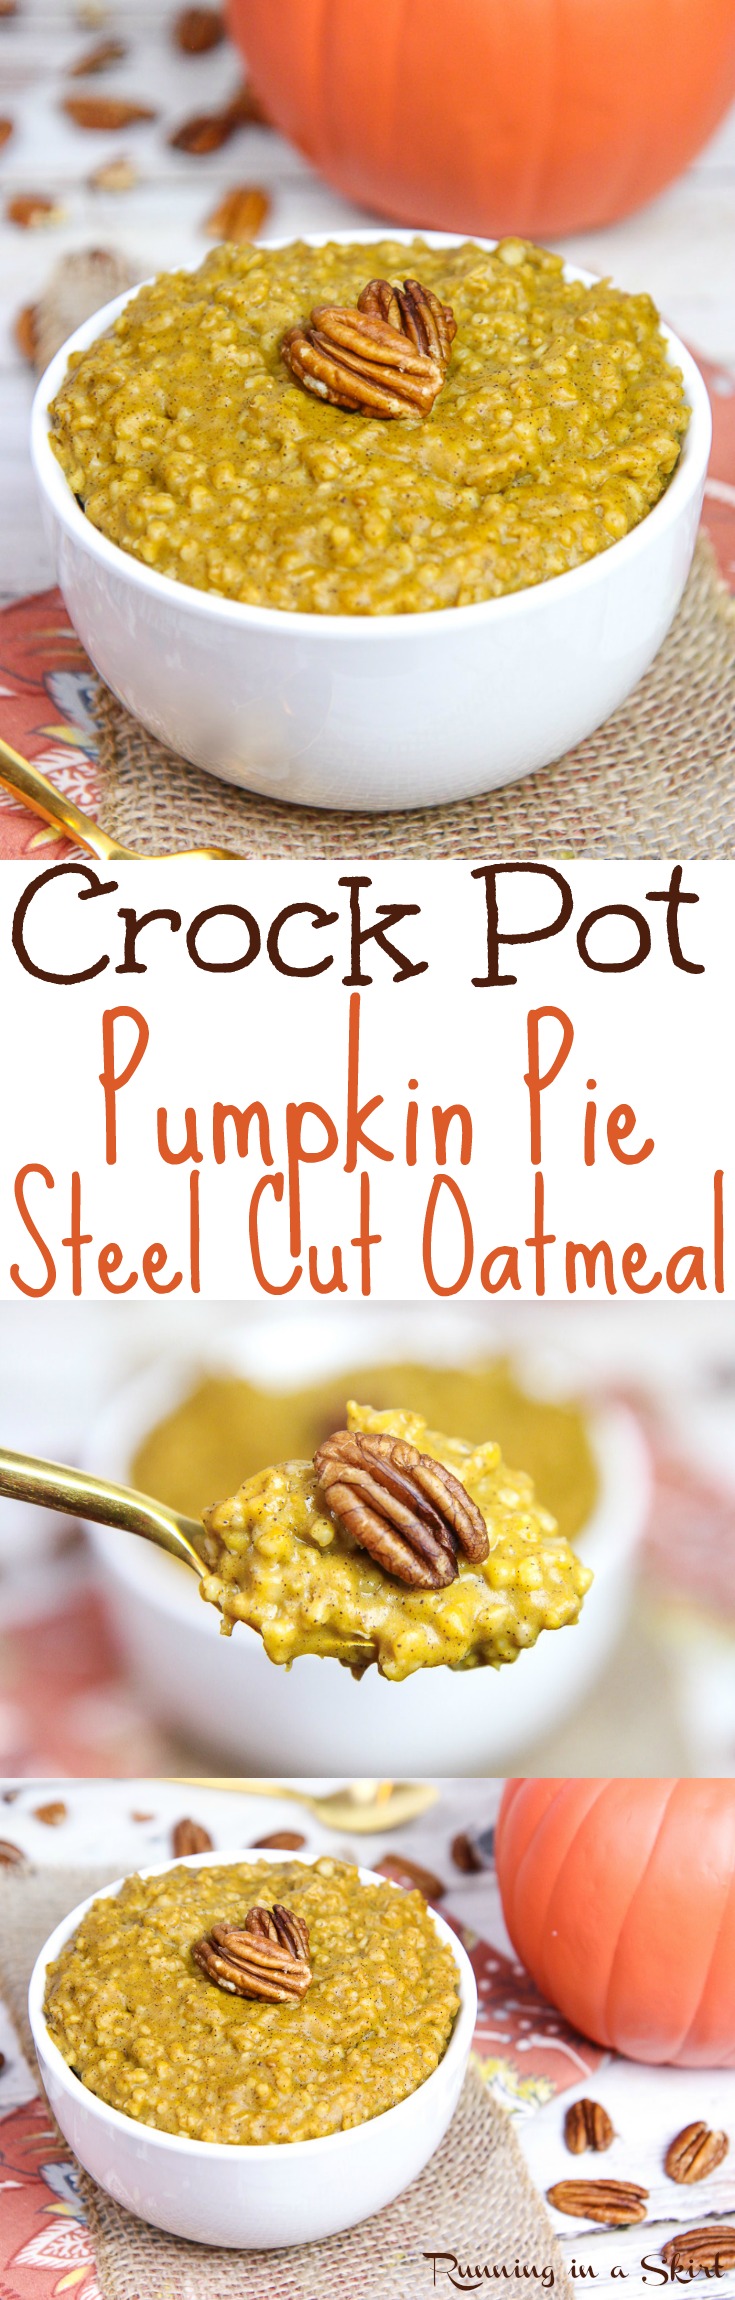 6 Ingredient Crock Pot Pumpkin Pie Steel Cut Oats - the perfect fall oatmeal recipes! This healthy Pumpkin Steel Cut Oats is a clean eating, vegan and can be cooked overnight. Uses almond milk, spices and maple syrup. / Running in a Skirt via @juliewunder